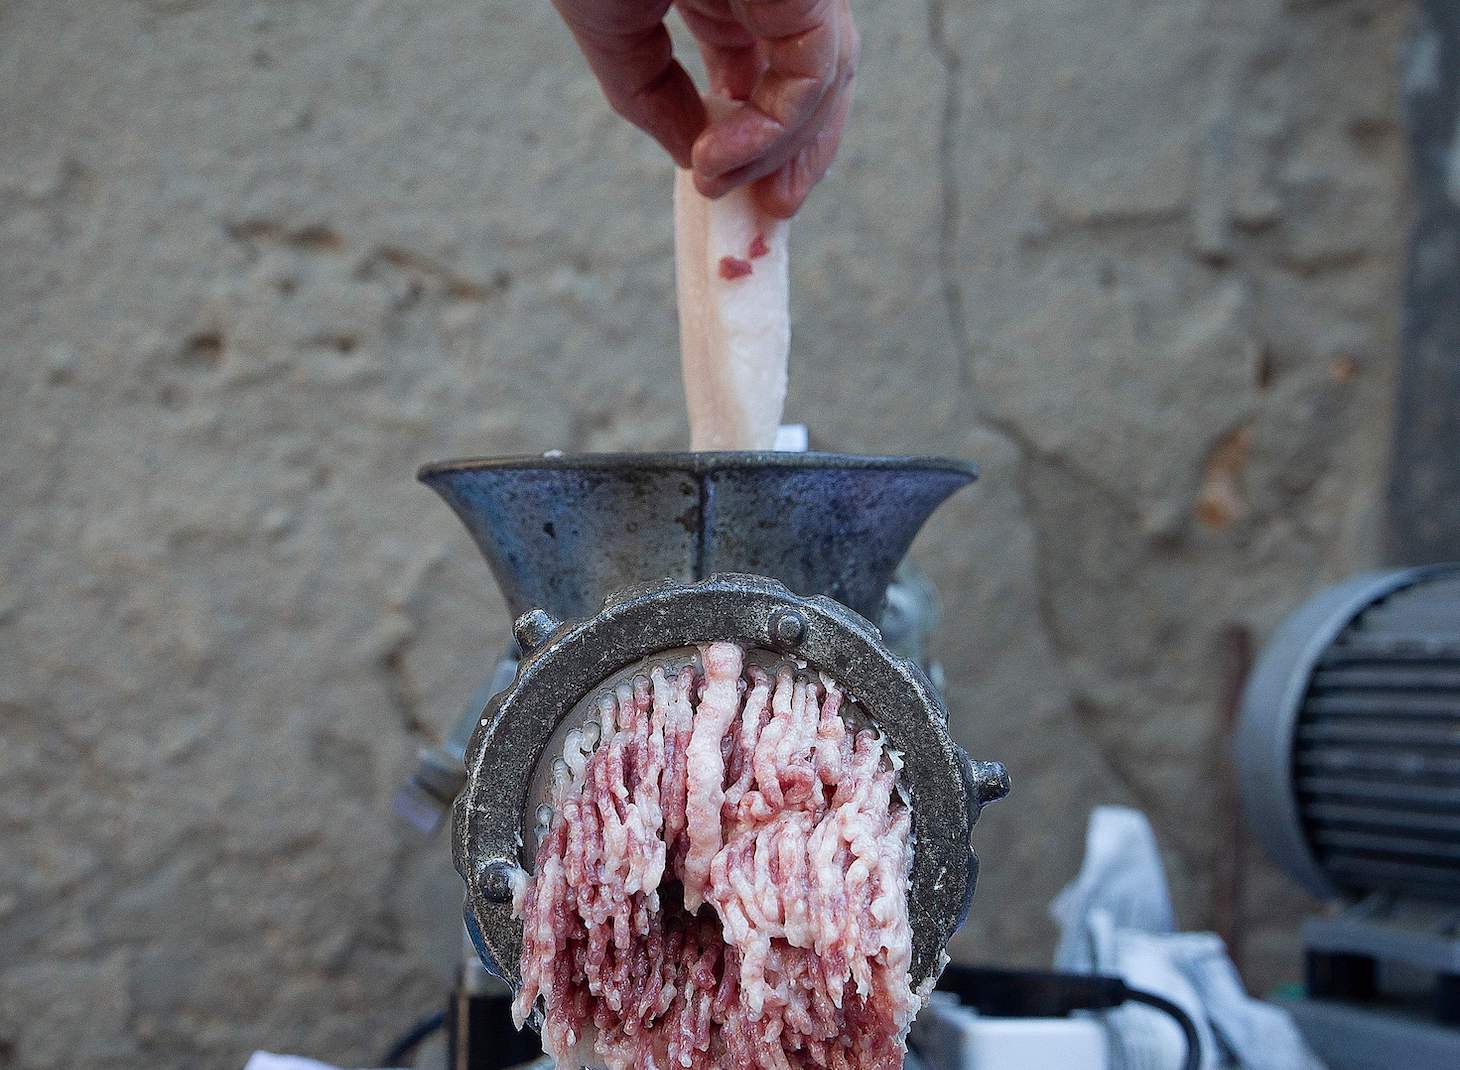 A member of the Ripoll Taberner family minces meat during the annual tradition of the pig slaughter (matanza de cerdo) in Llucmajor on the Spanish Balearic Island of Mallorca on November 23, 2020. - For the traditional slaughter, a pig is fattened up for a year and then killed on a cold day to ensure the best conservation of the "sobrasada" sausages. (Photo by JAIME REINA / AFP) (Photo by JAIME REINA/AFP via Getty Images)